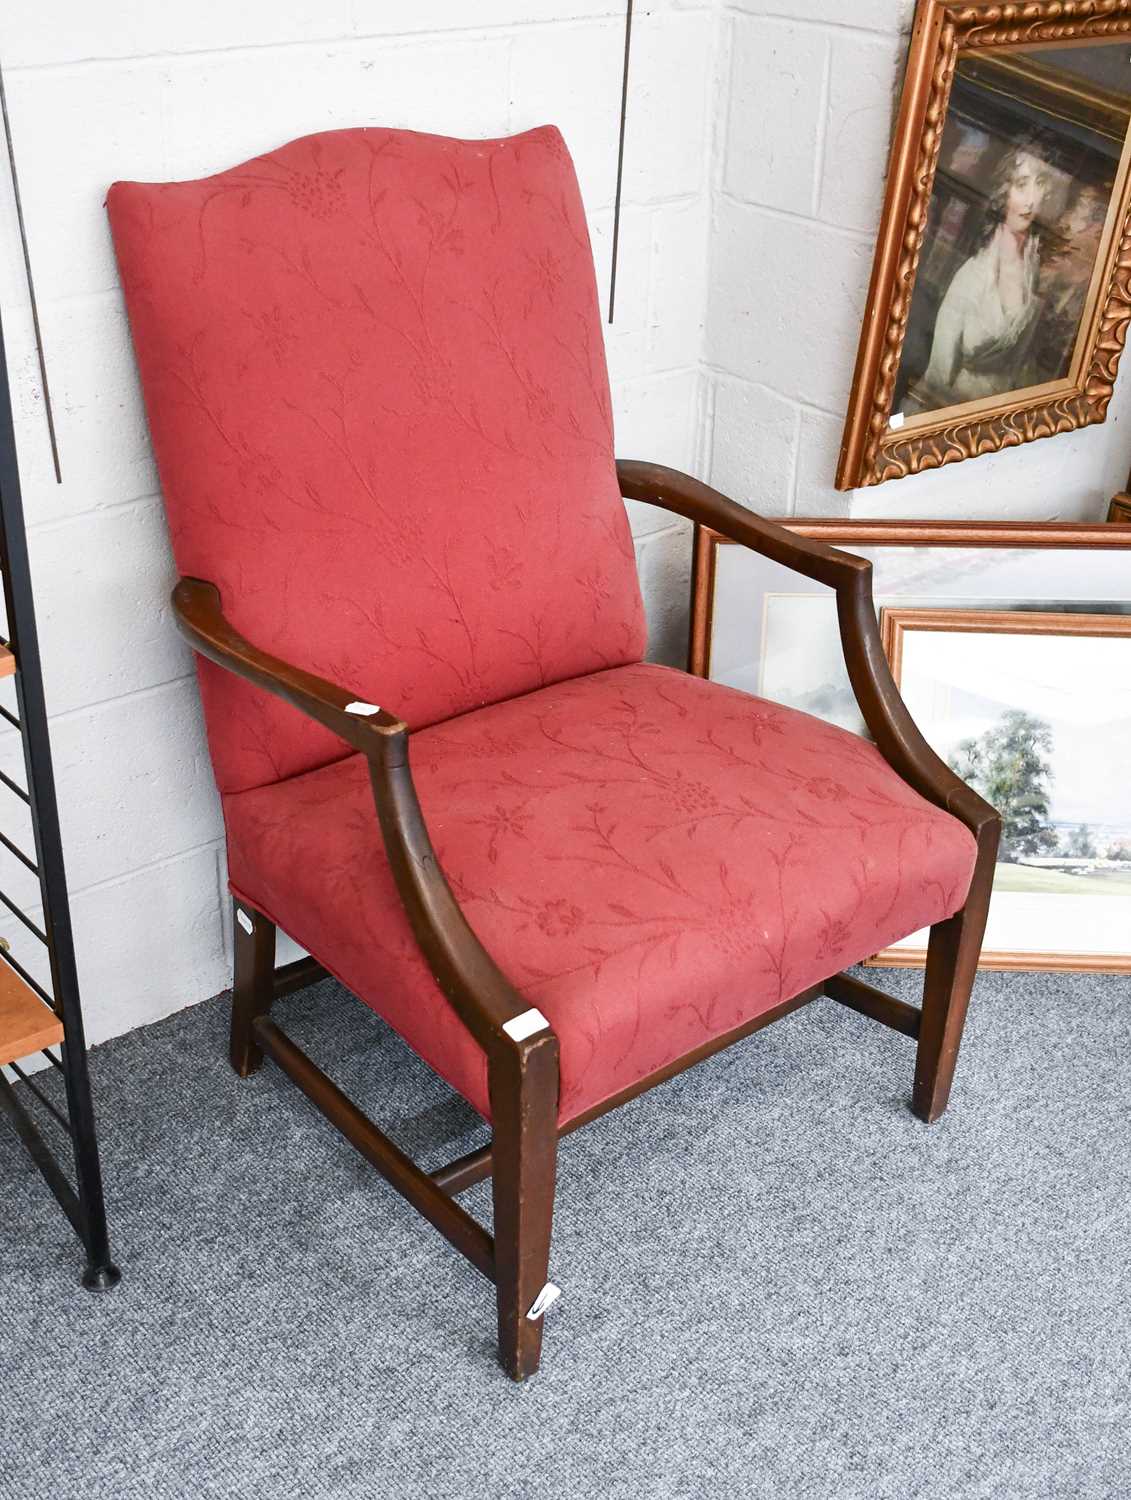 A Pair of 19th Century Mahogany Gainsbrough Chairs, One chair with a repaired arm, both with some - Image 4 of 4